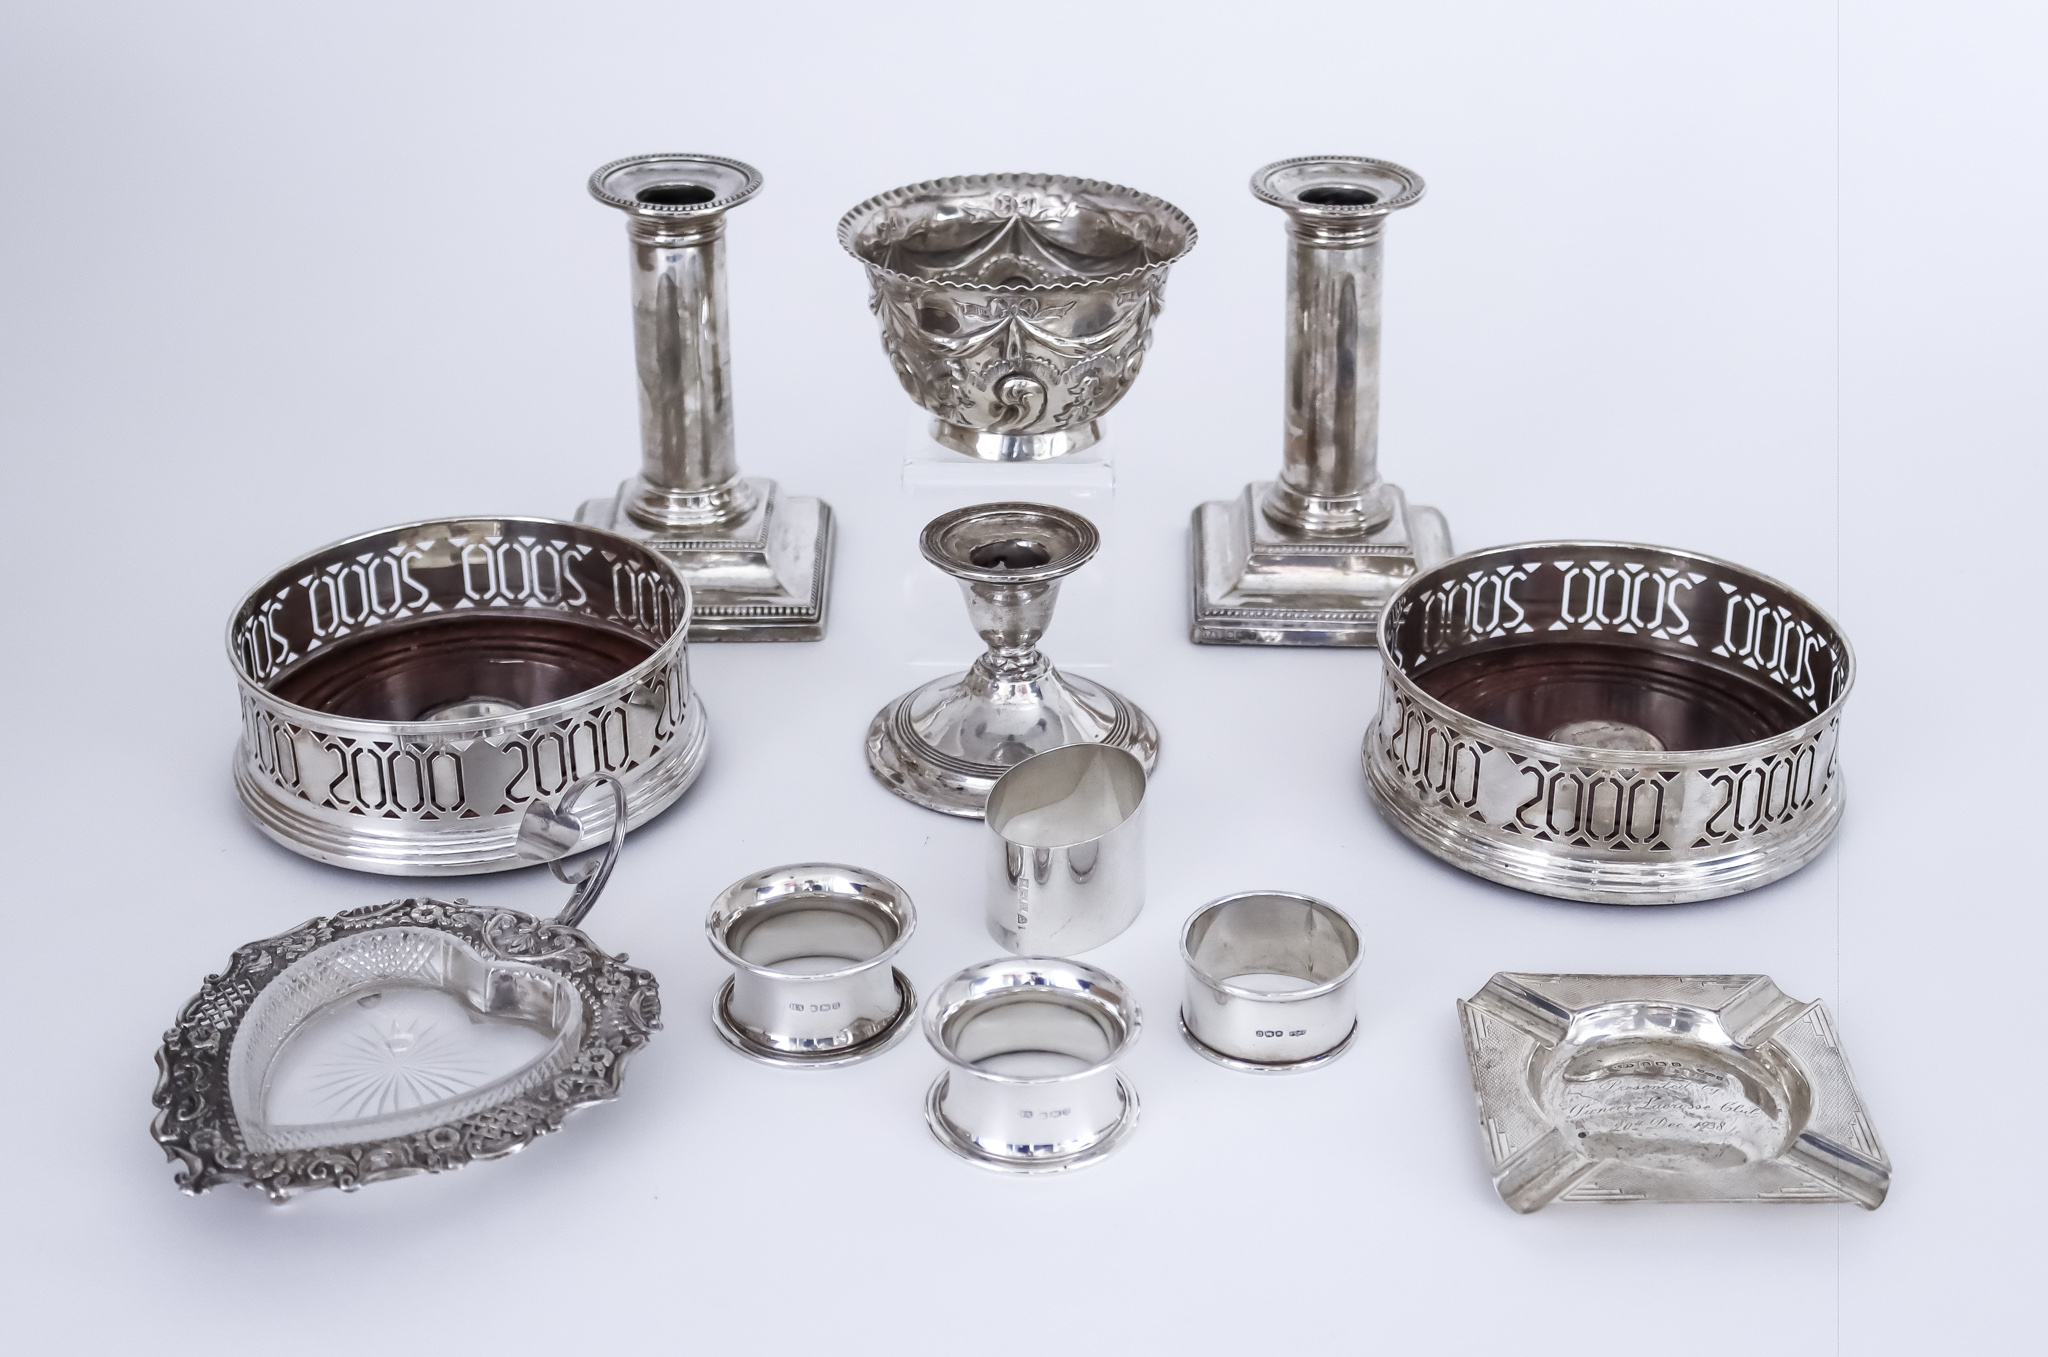 A Pair of Elizabeth II Silver Circular Coasters and Mixed Silver Ware, the coasters by W.I. Broadway